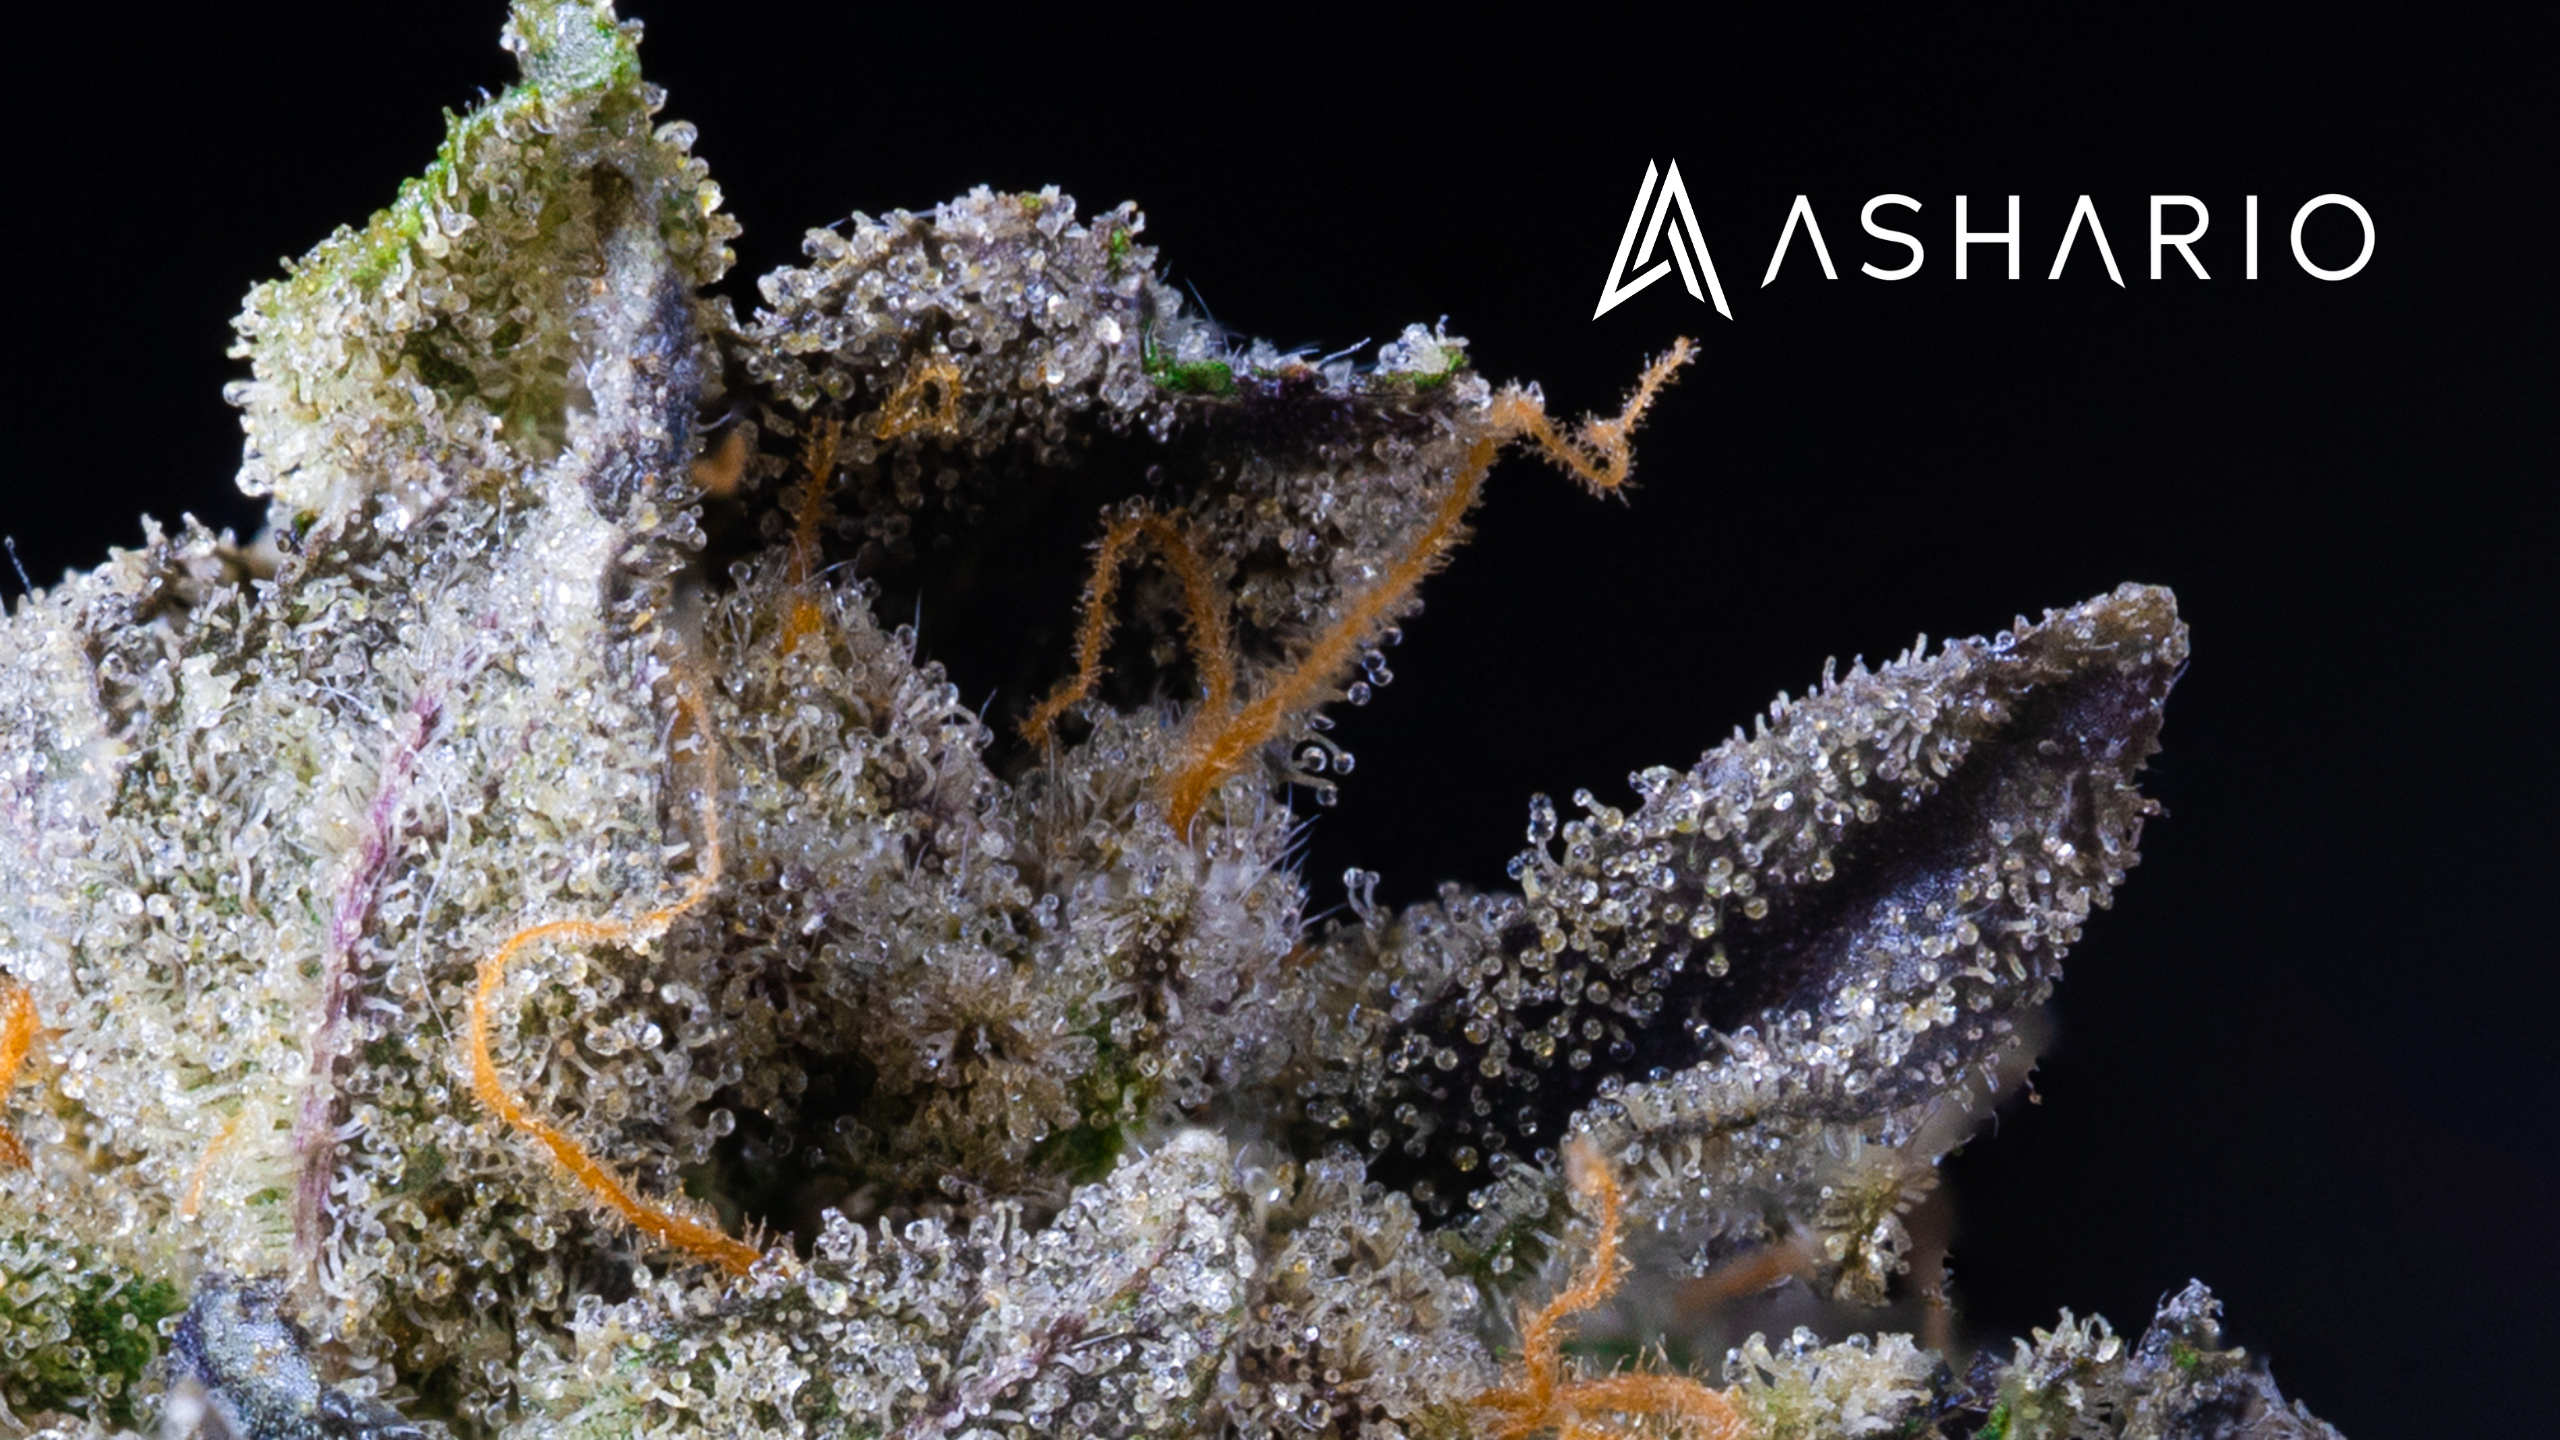 Discover the best cannabis products near you at Ashario Cannabis. From high-quality flower to potent concentrates and delicious edibles, our dispensary offers a wide range of options to suit every preference and need.